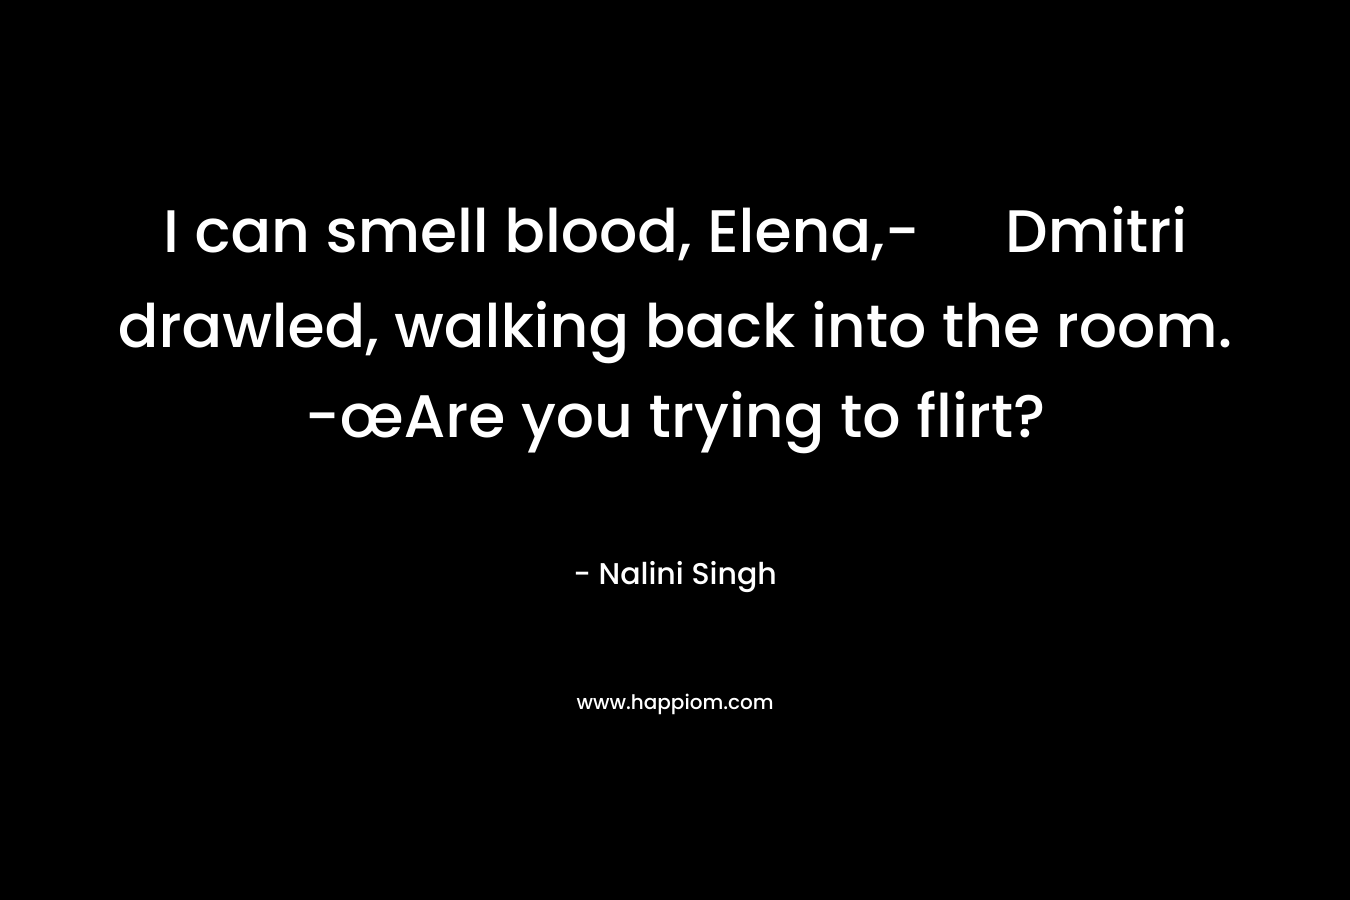 I can smell blood, Elena,- Dmitri drawled, walking back into the room. -œAre you trying to flirt?